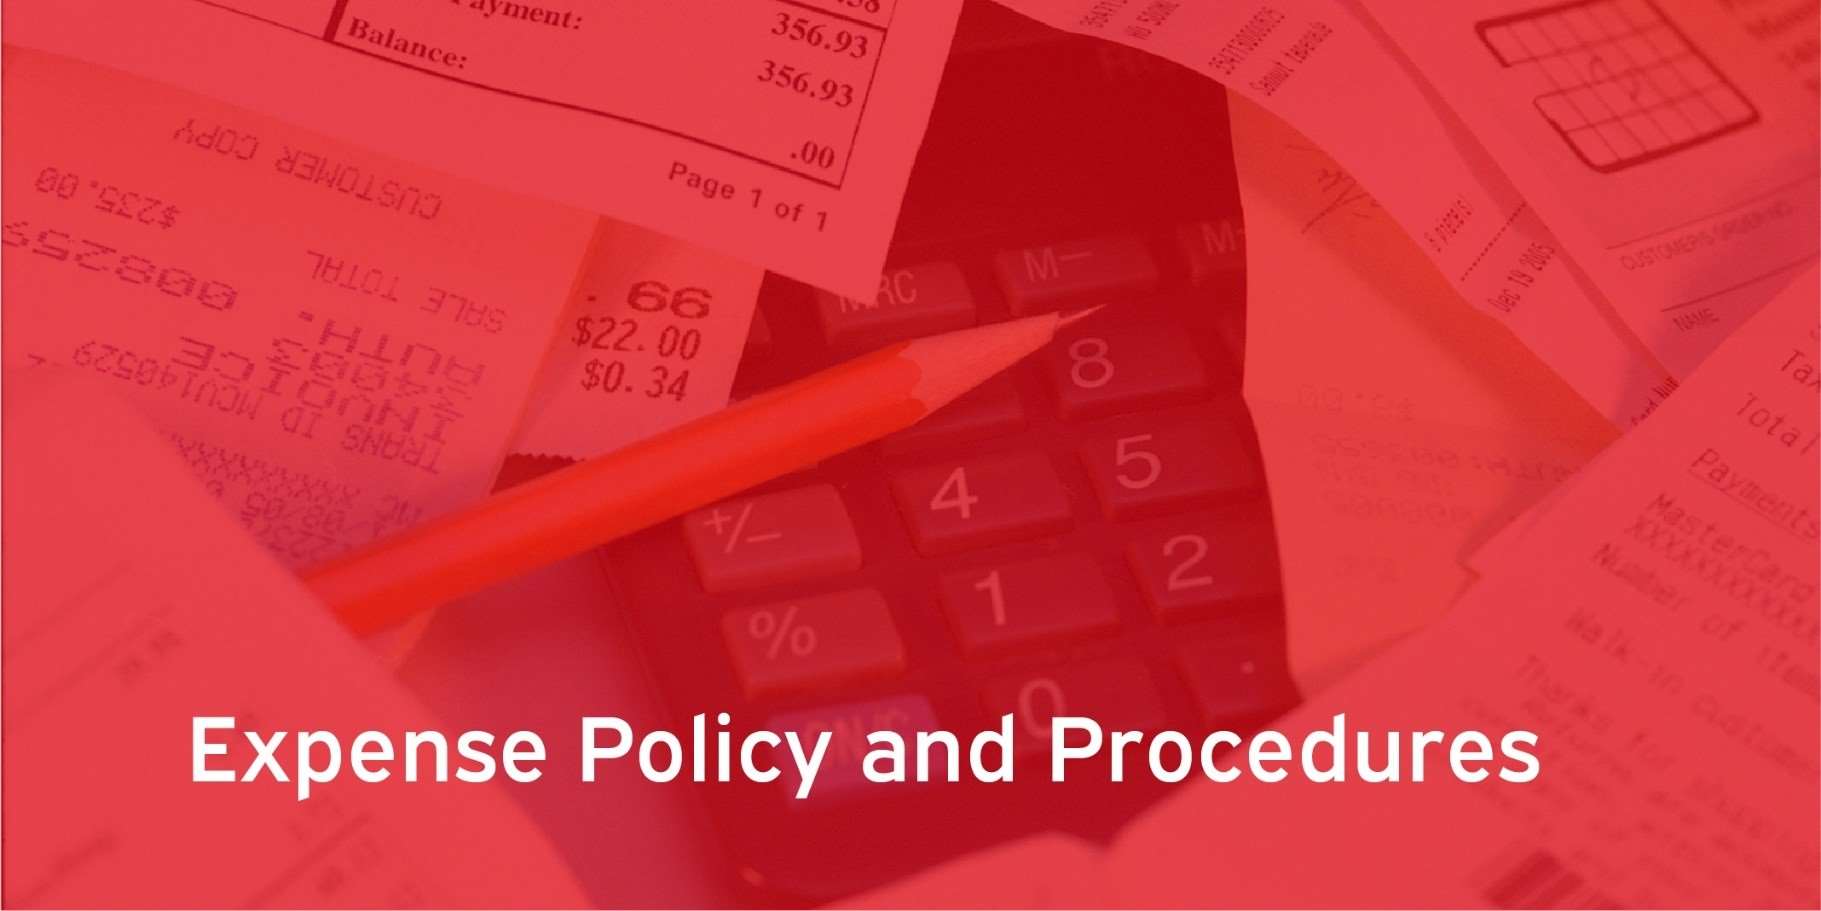 Expense policy and procedures services banner